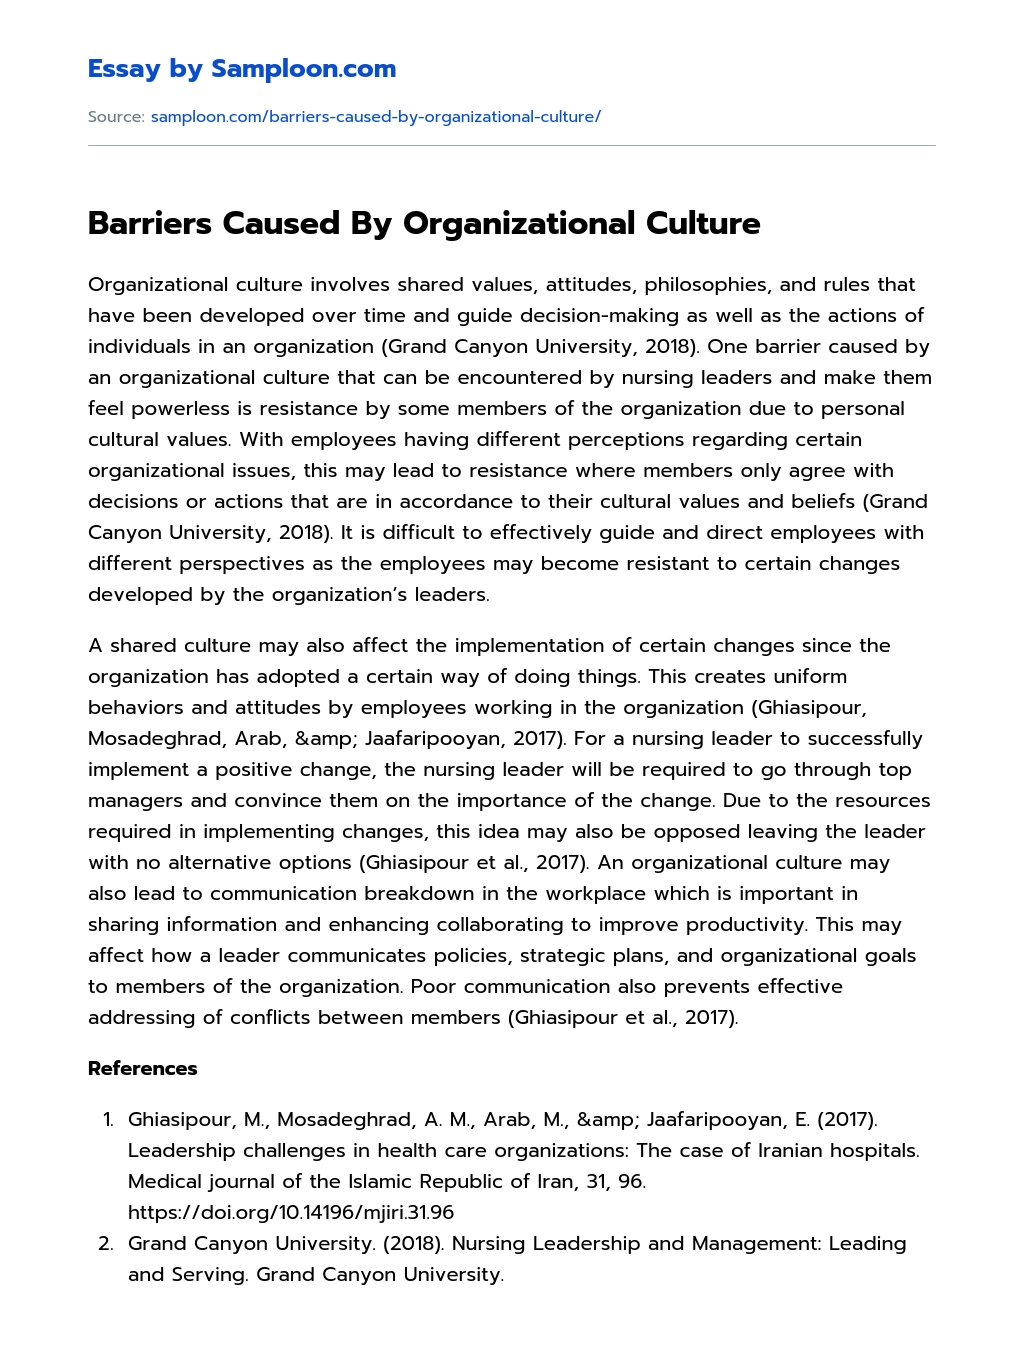 Barriers Caused By Organizational Culture essay